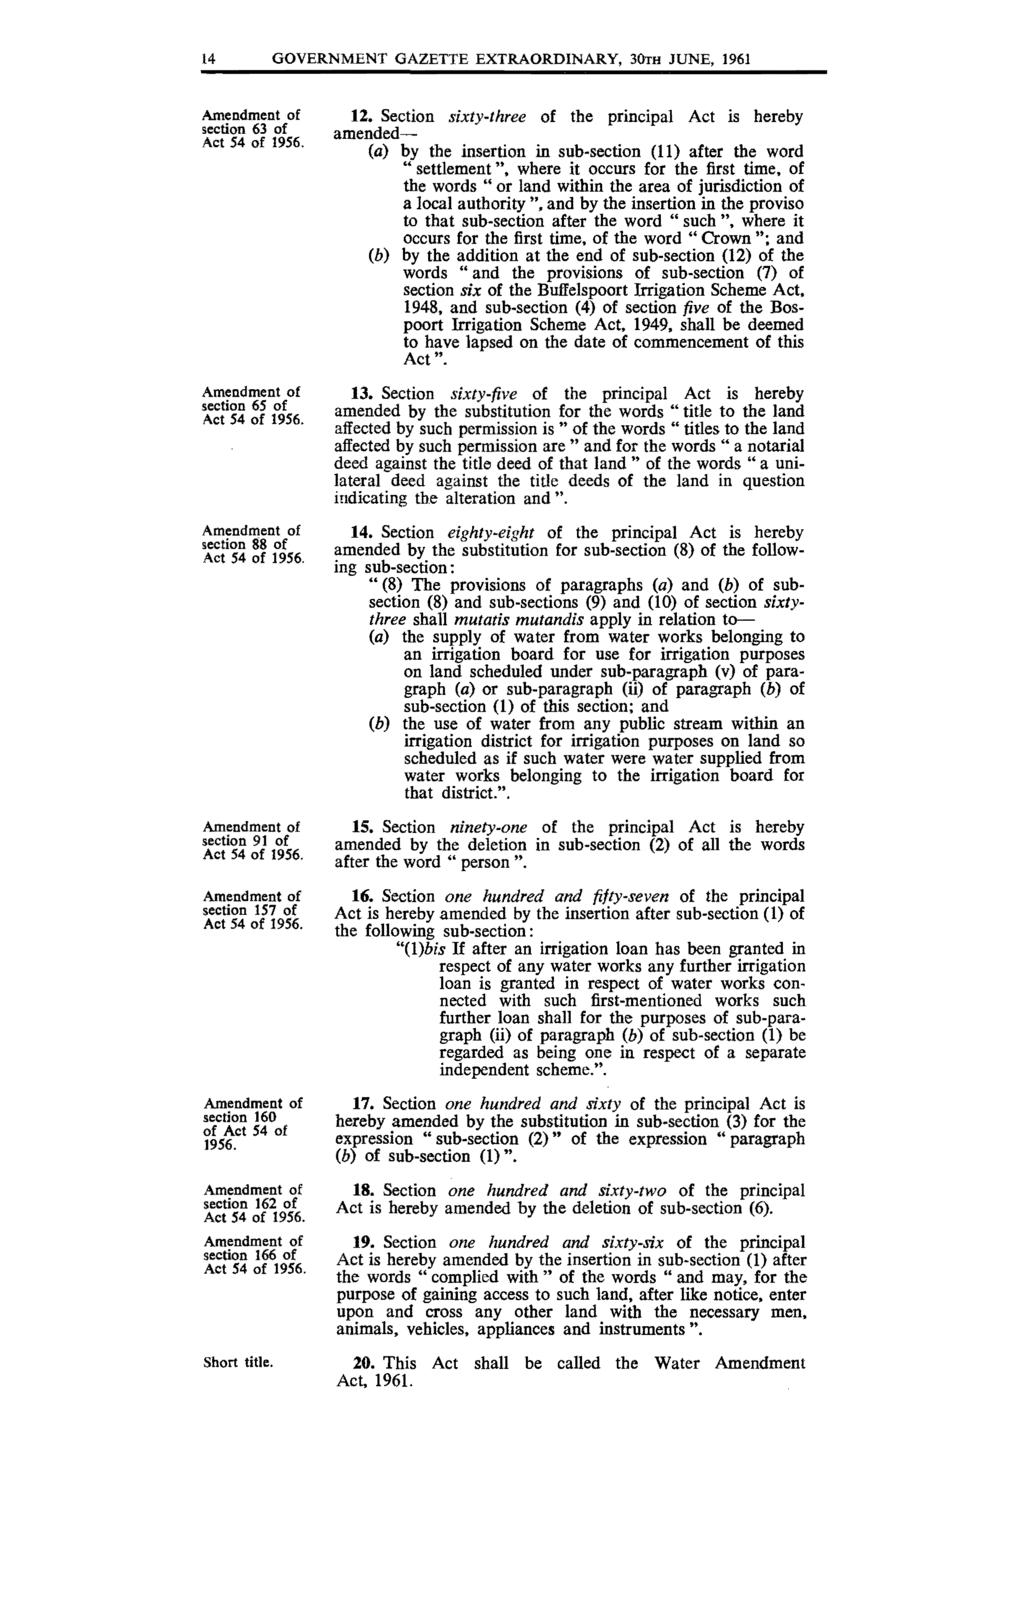 14 GOVERNMENT GAZETTE EXTRAORDINARY, 30TH JUNE, 1961 section 63 of Act 54 of 1956. section 65 of Act 54 of 1956. section 88 of Act 54 of 1956. section 91 of Act S4 of 1956.